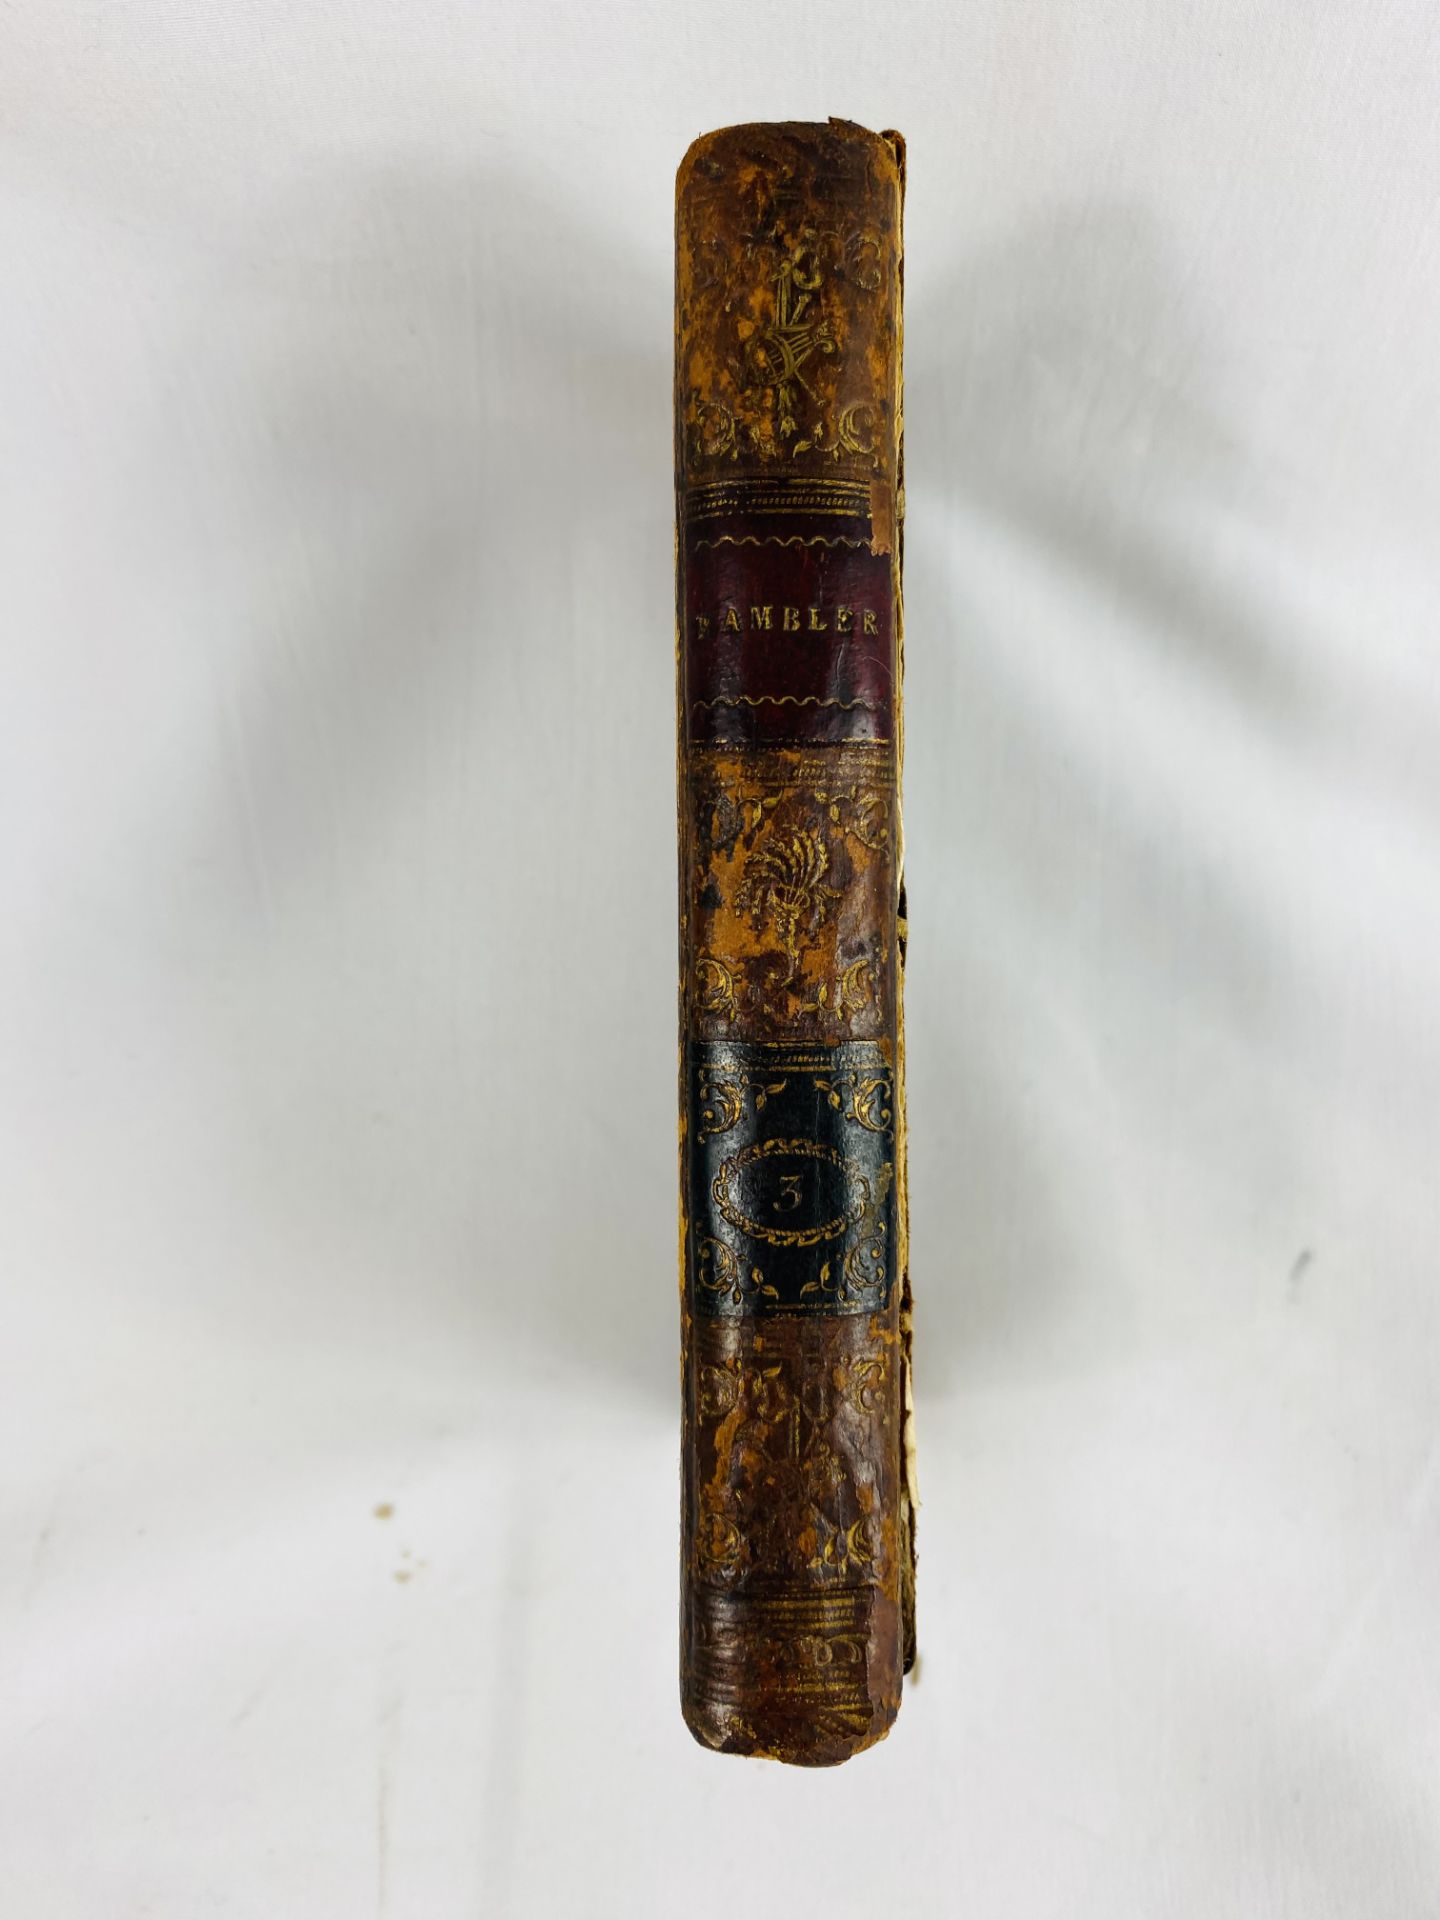 The Rambler by Dr Samuel Johnson and other books - Image 5 of 6